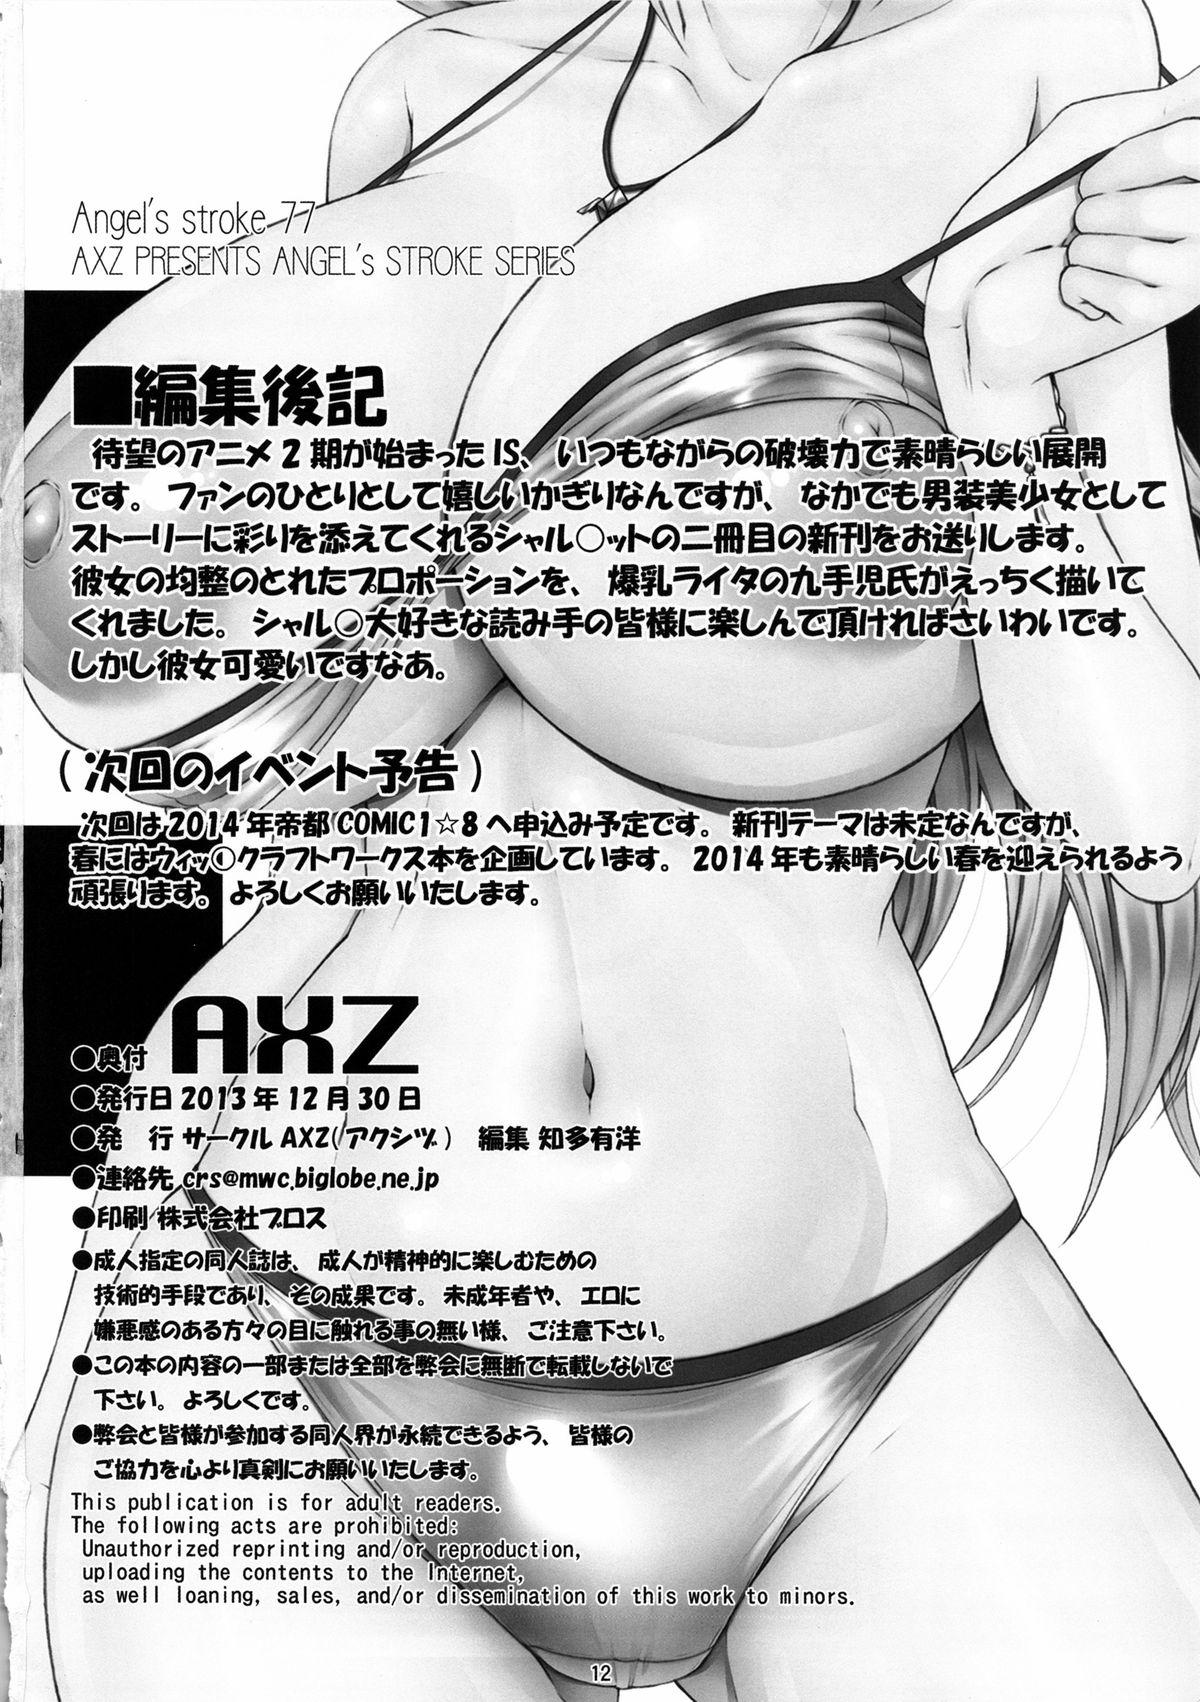 Officesex Angel's Stroke 77 Infinite Charlotte! - Infinite stratos Family Porn - Page 13